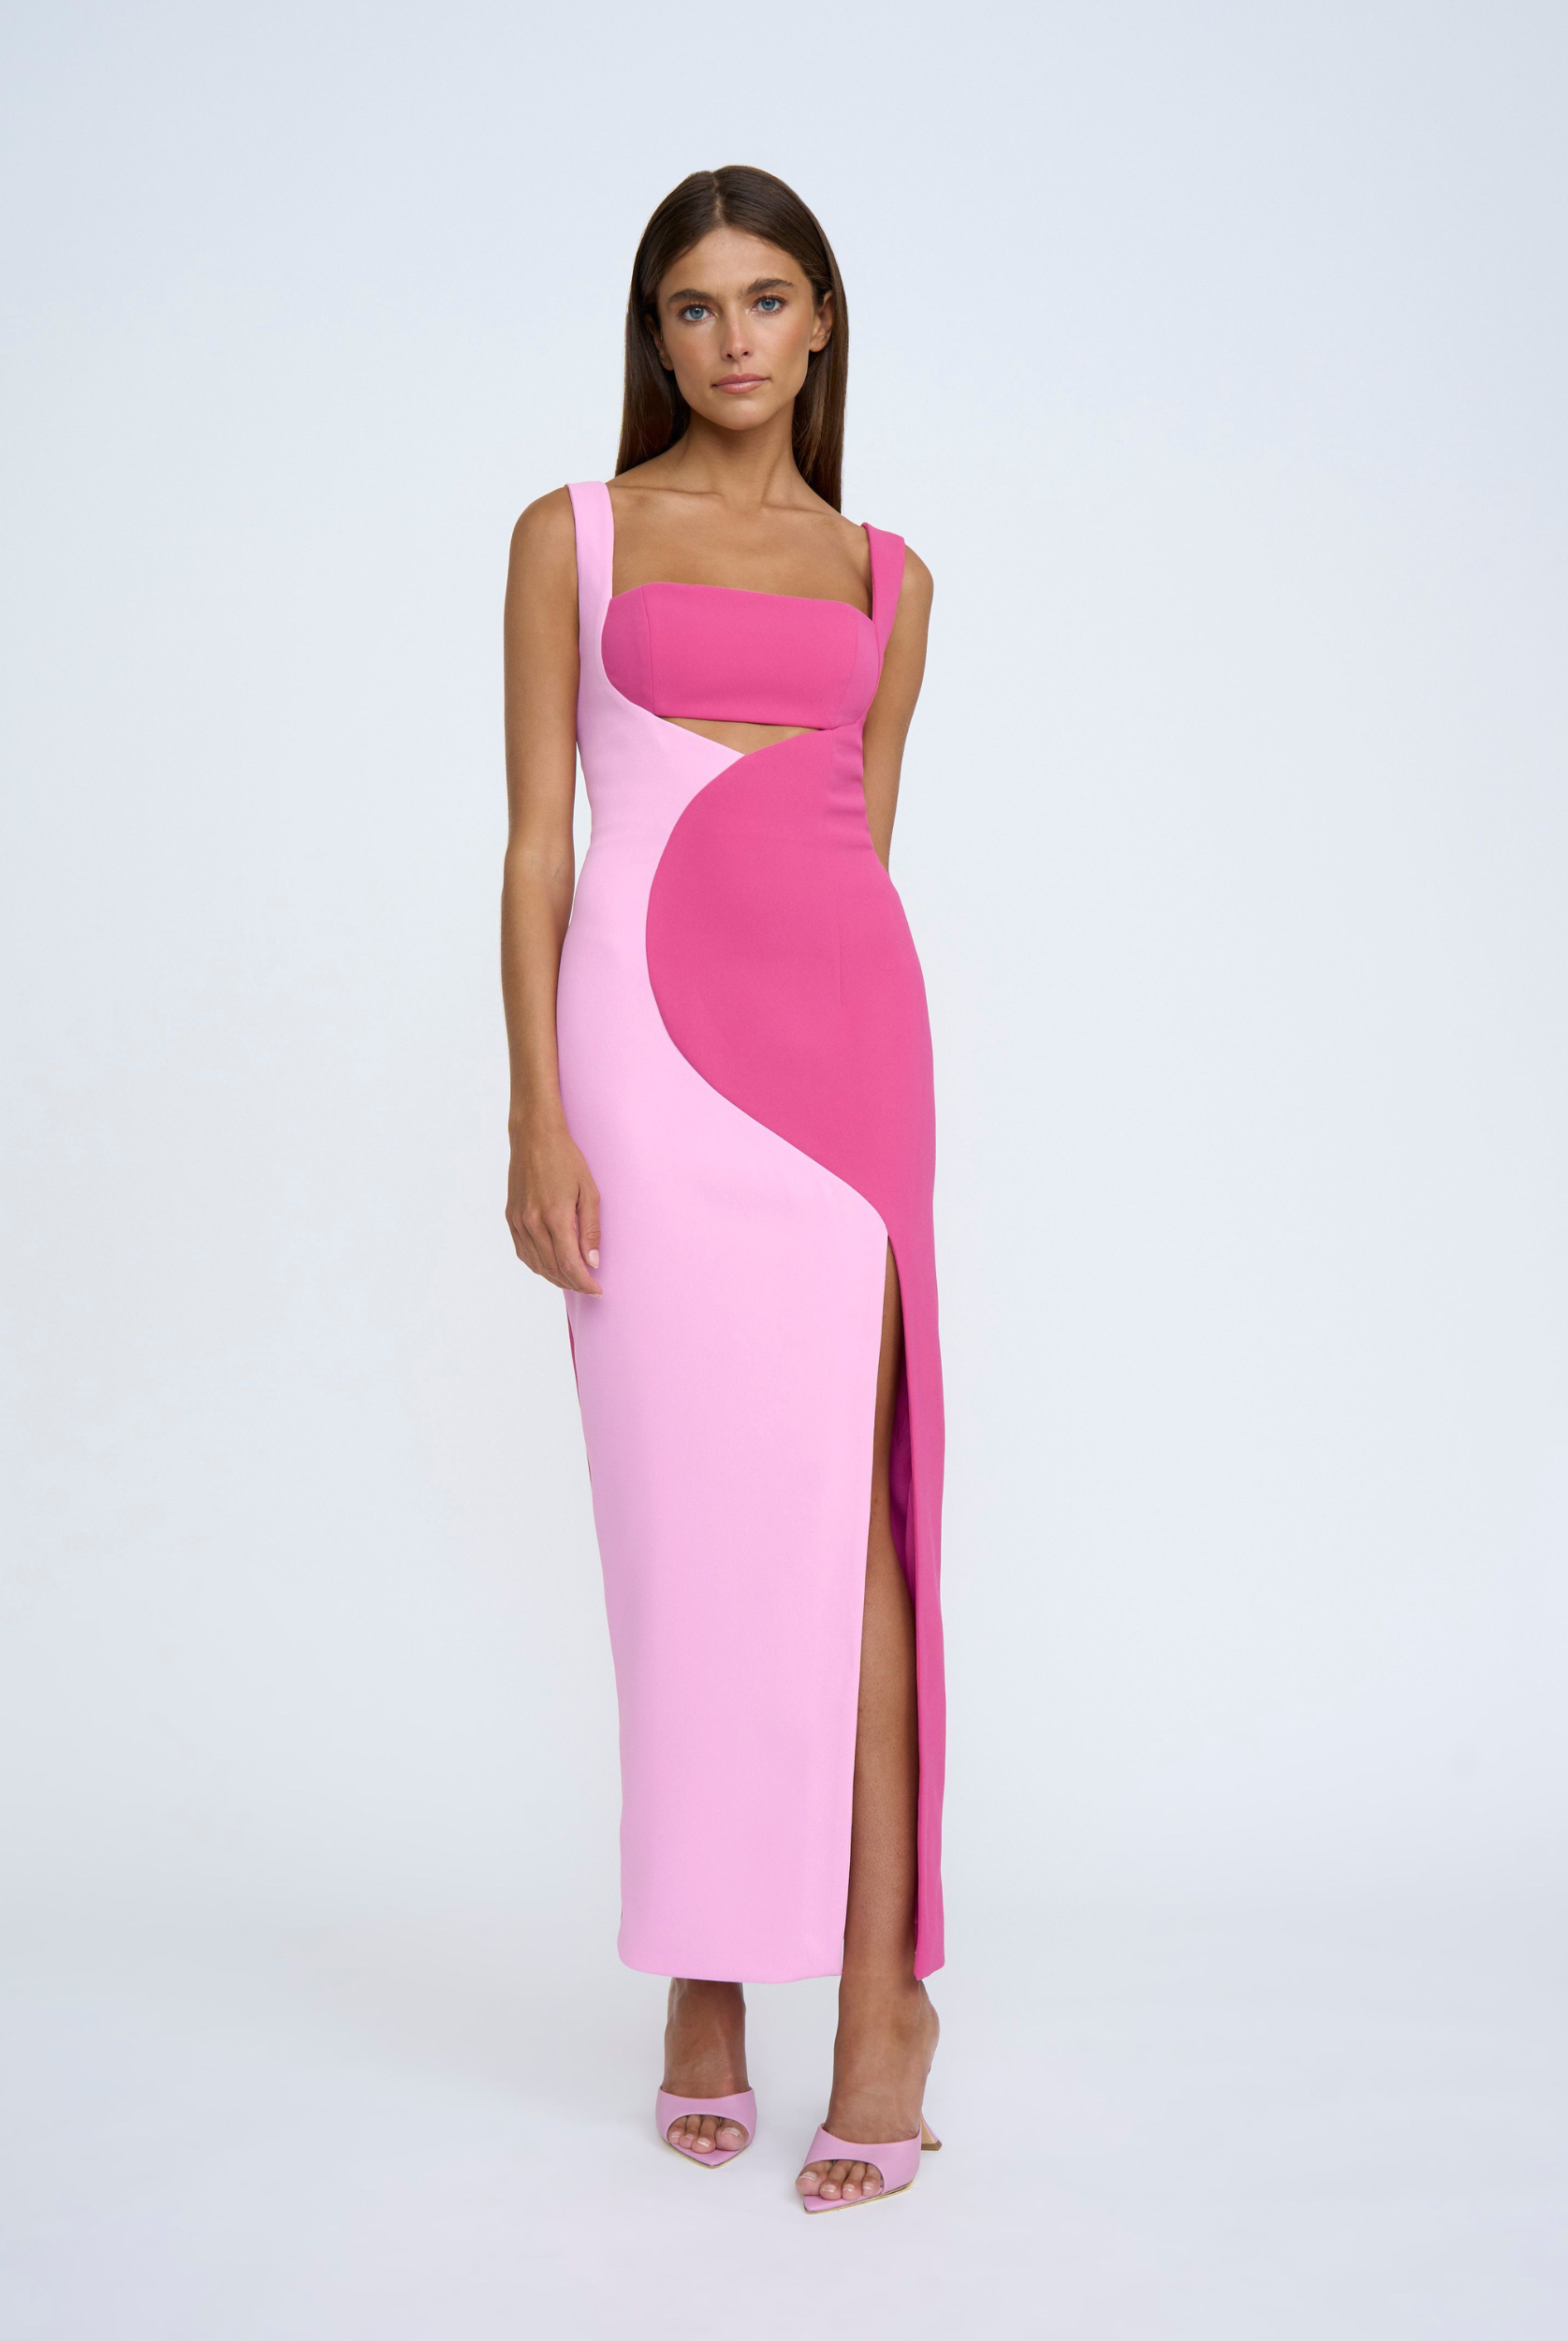 Model wearing the Caterina Two tone pink and dark pinkMidi Dress from Australian Designer Brand By Johnny 